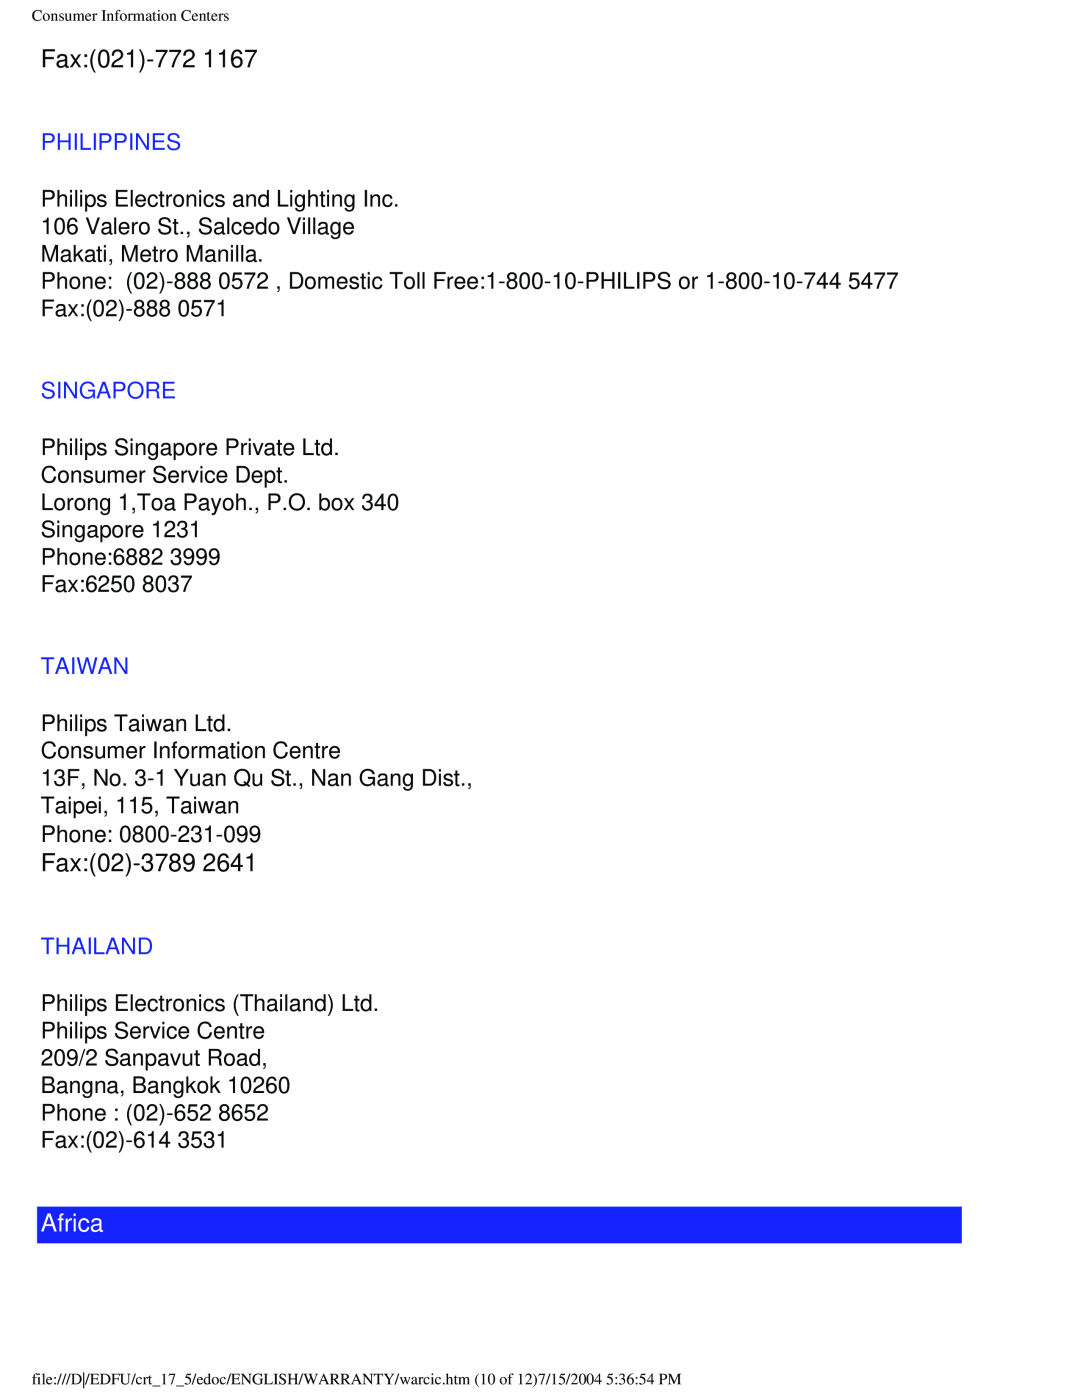 Philips 107G user manual Fax02-3789, Africa, Fax021-772, Philippines, Singapore, Taiwan, Thailand 